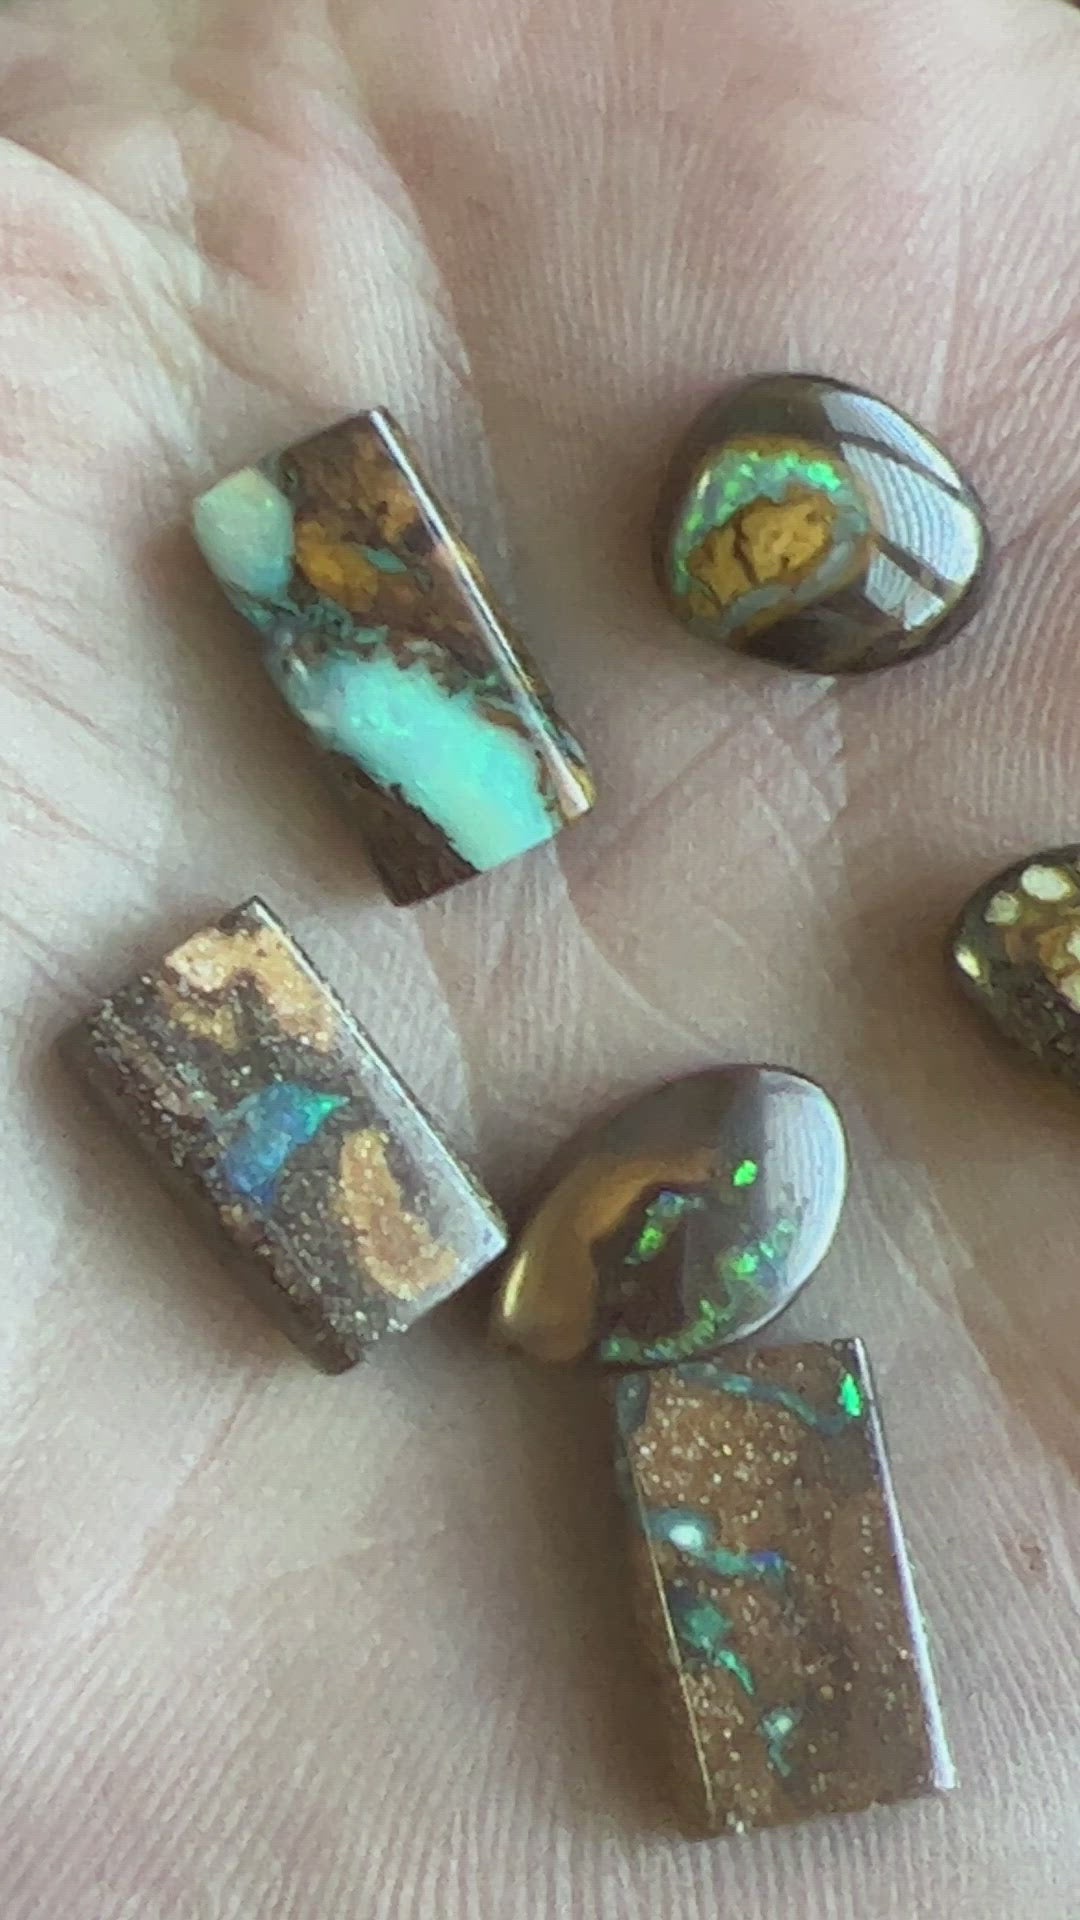 Beautiful boulder opal bundle from Winton. Cut and polished, ready for setting. Perfect for pendants or rings.